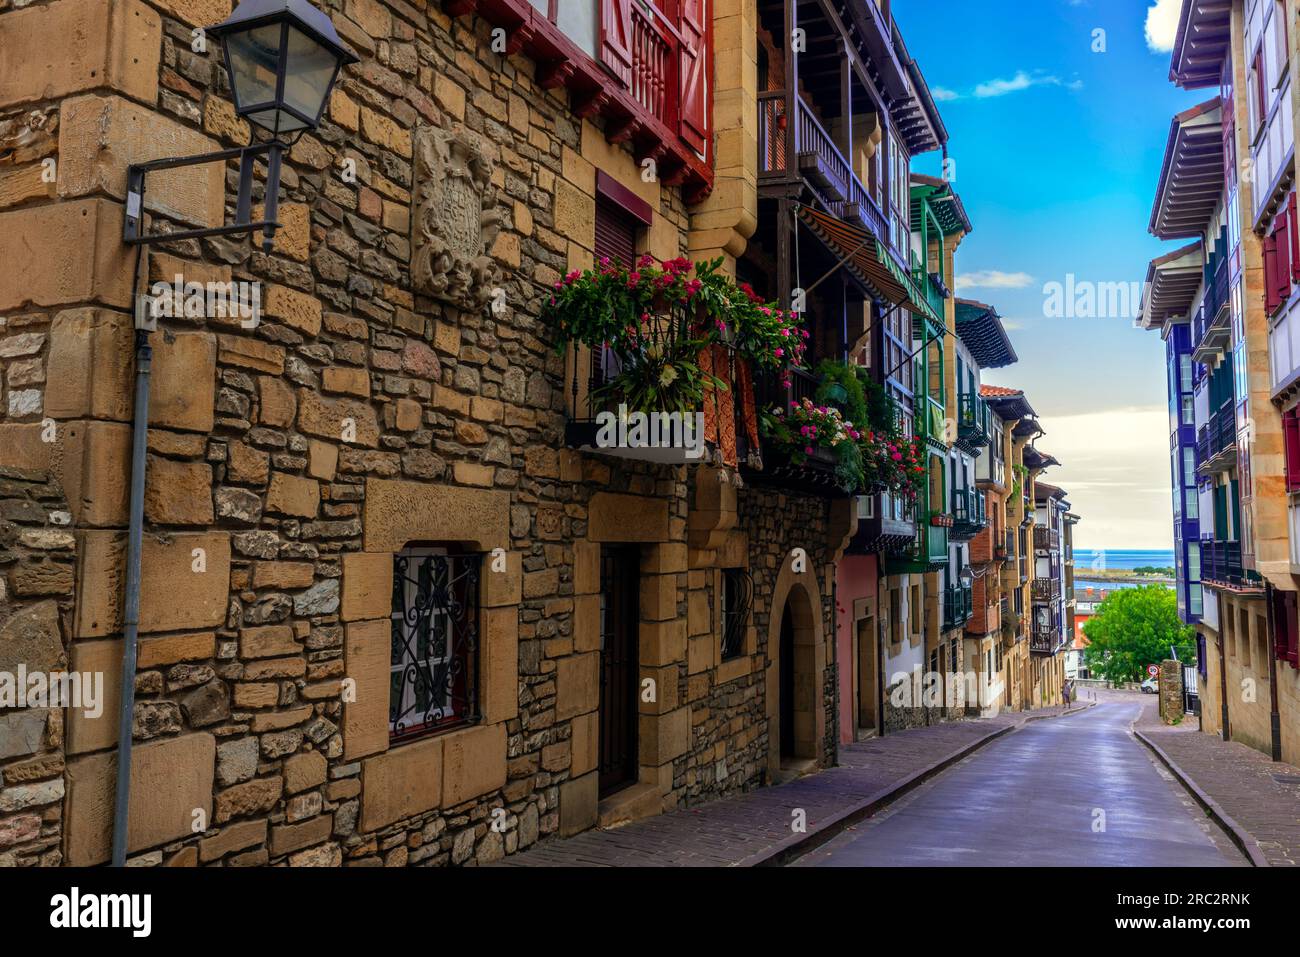 Picturesque half-timbered houses and architecture of Hondarribia old town, Basque country, Spain. Stock Photo